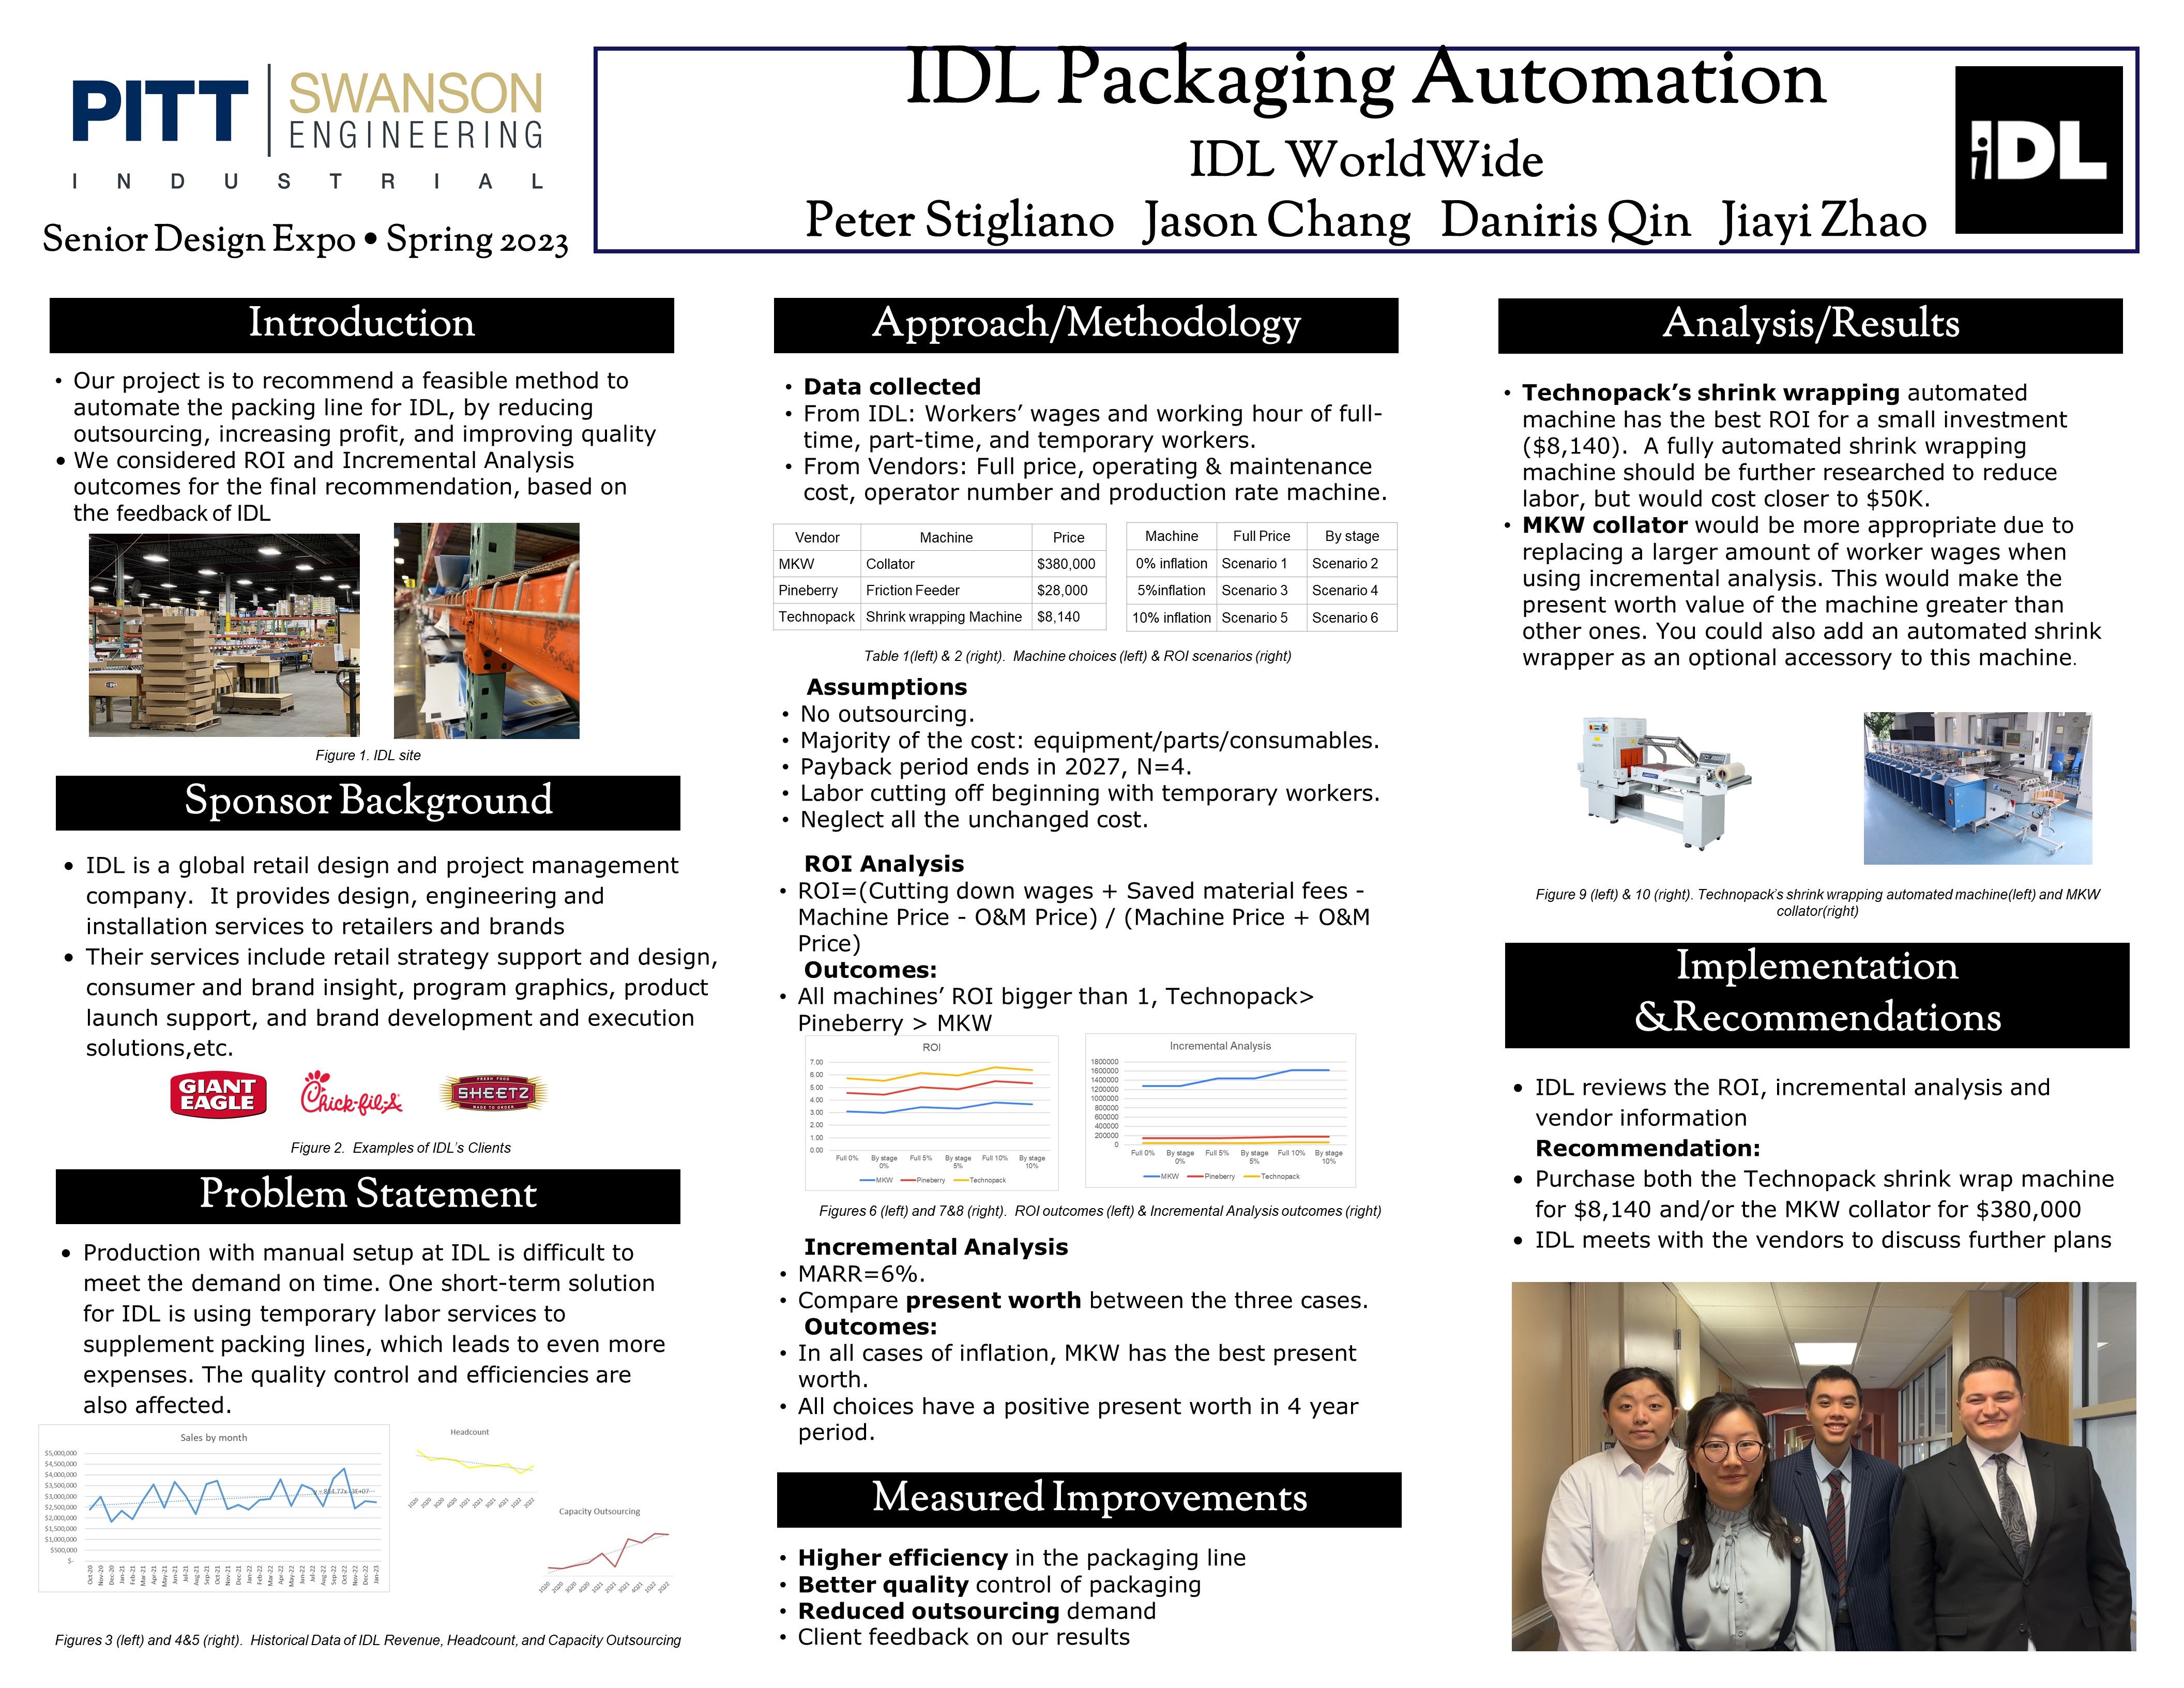 IDL Packing Automation research project poster